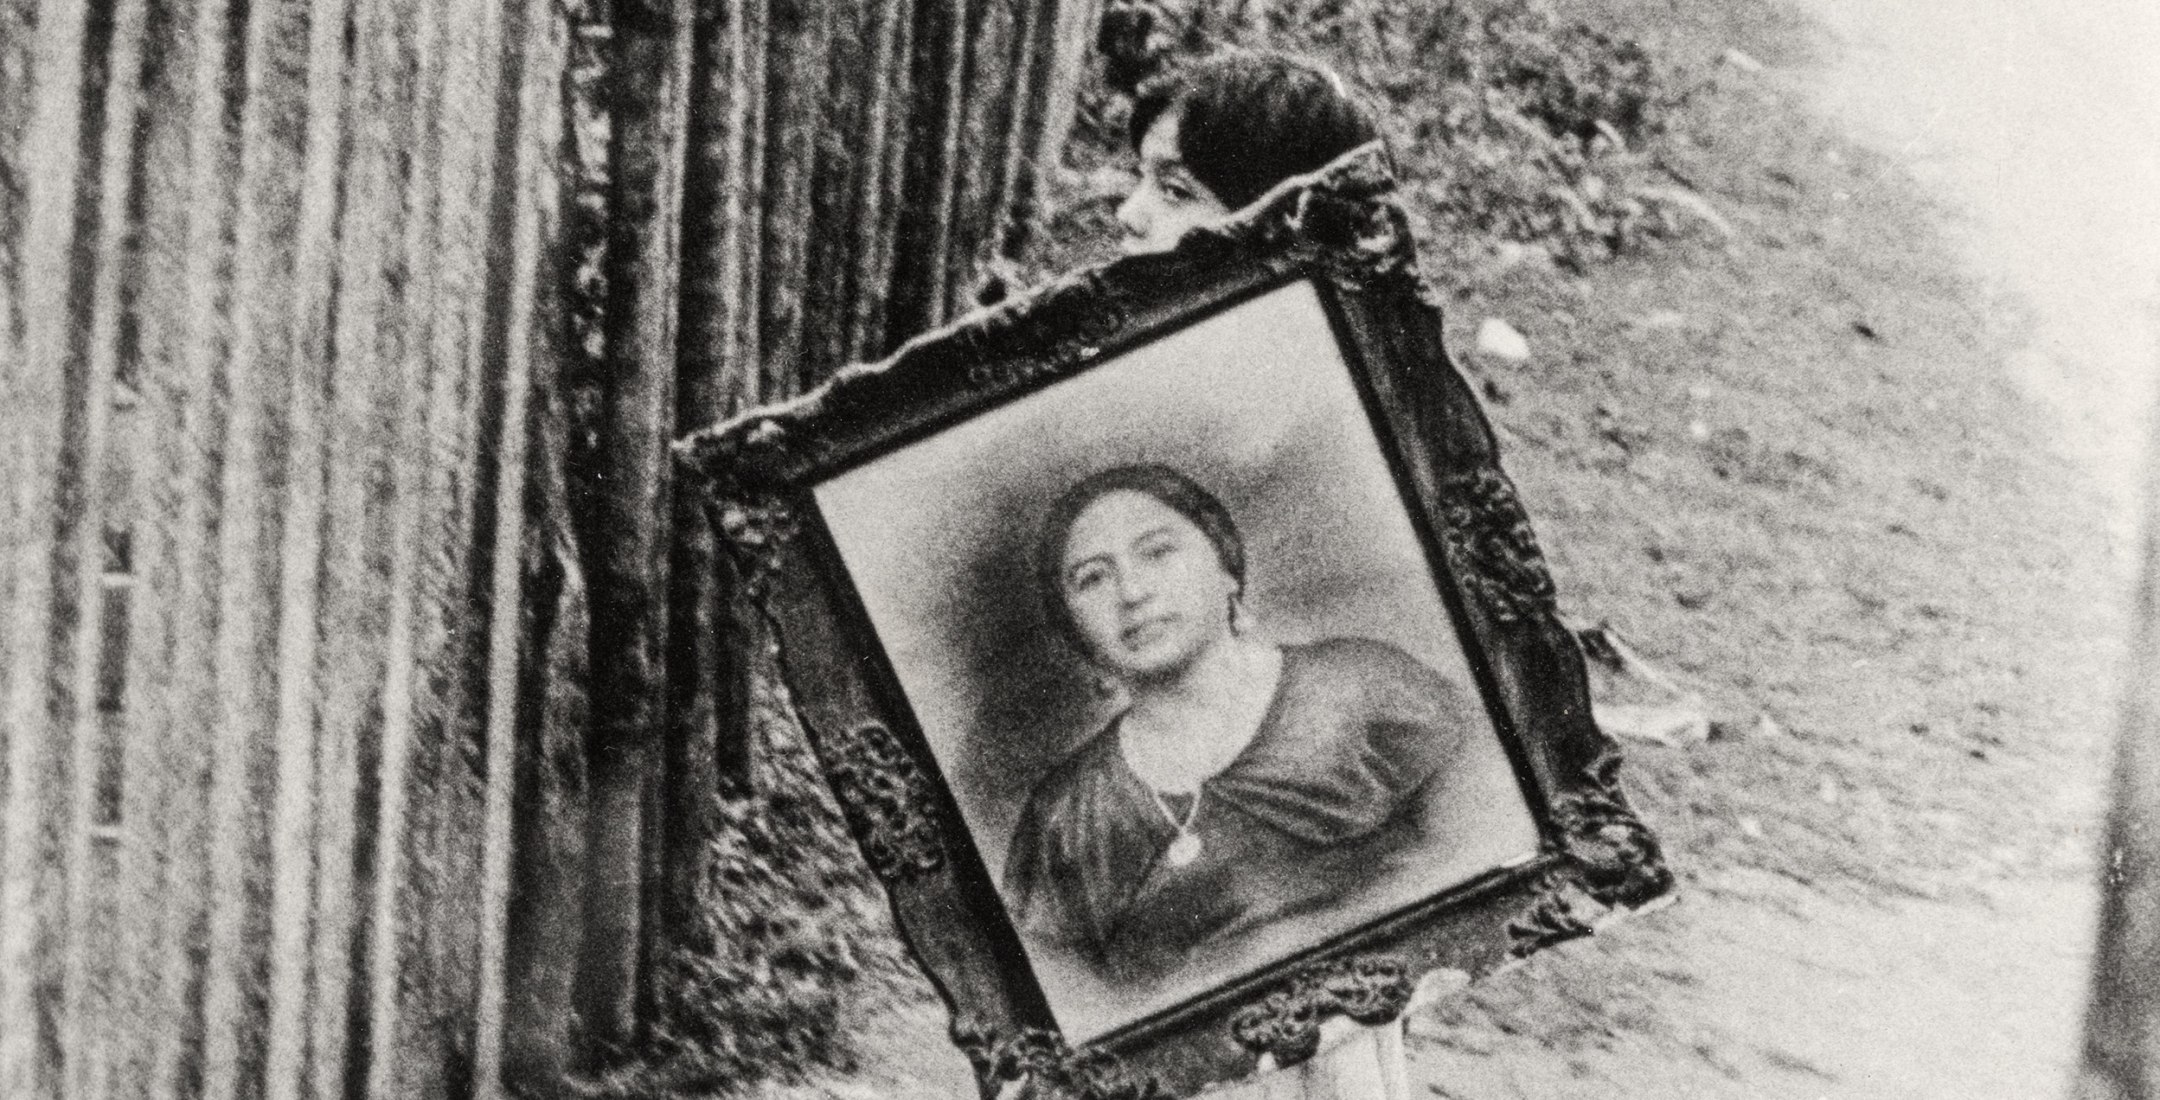 Black and white photo of a young girl carrying a framed portrait of a woman.